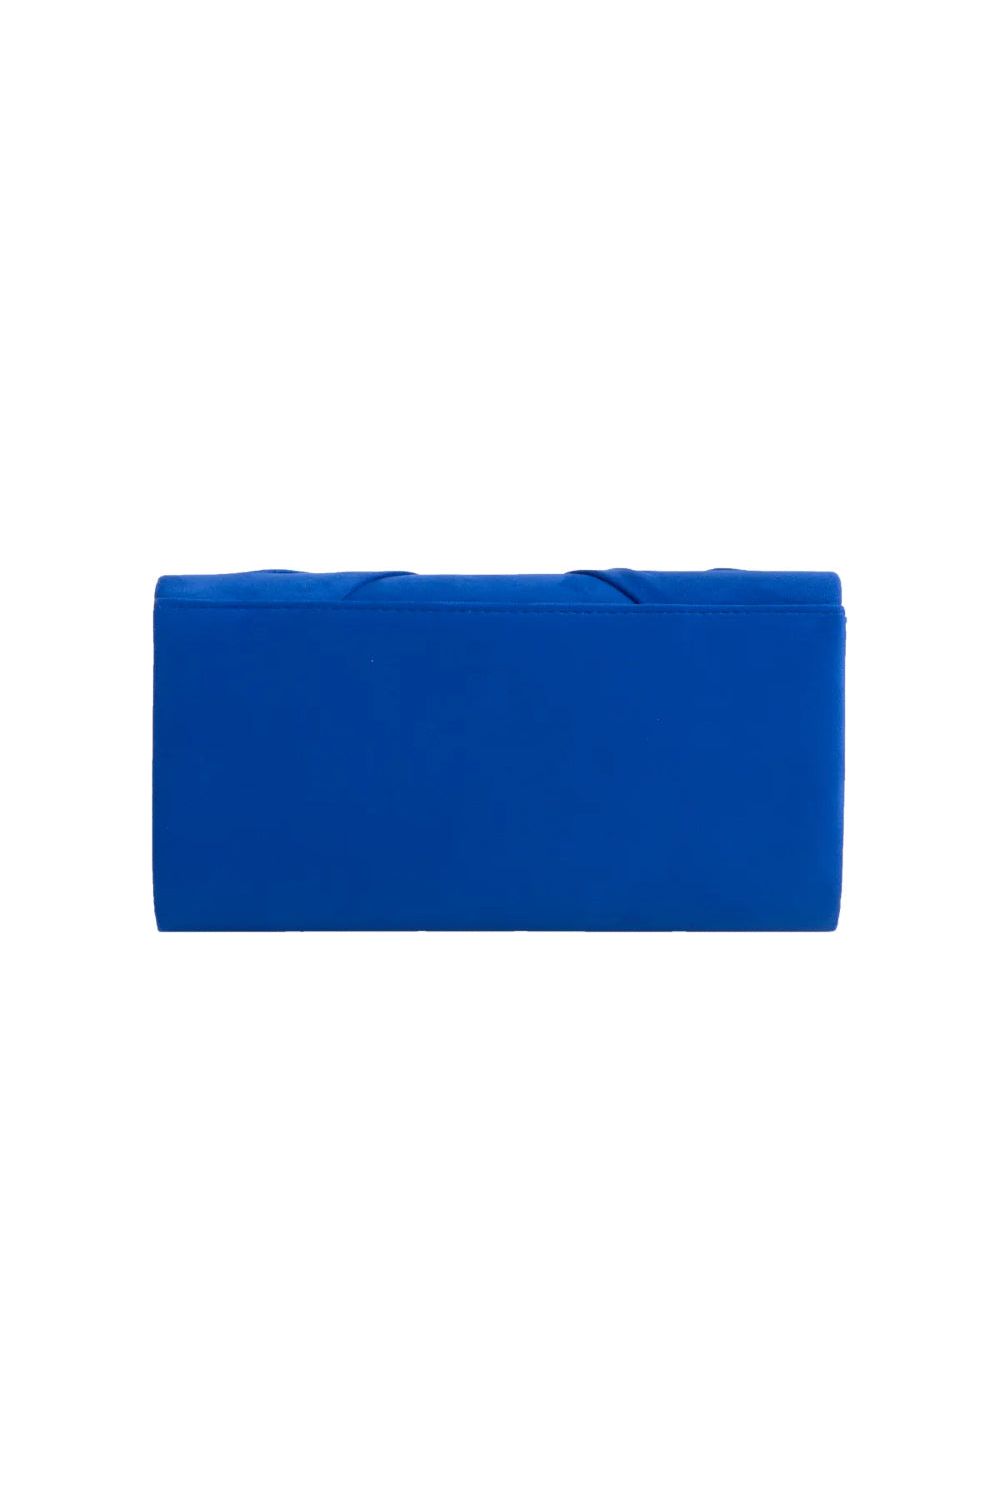 Royal Blue Suede Clutch Bag With Knot Detail ALJ2724